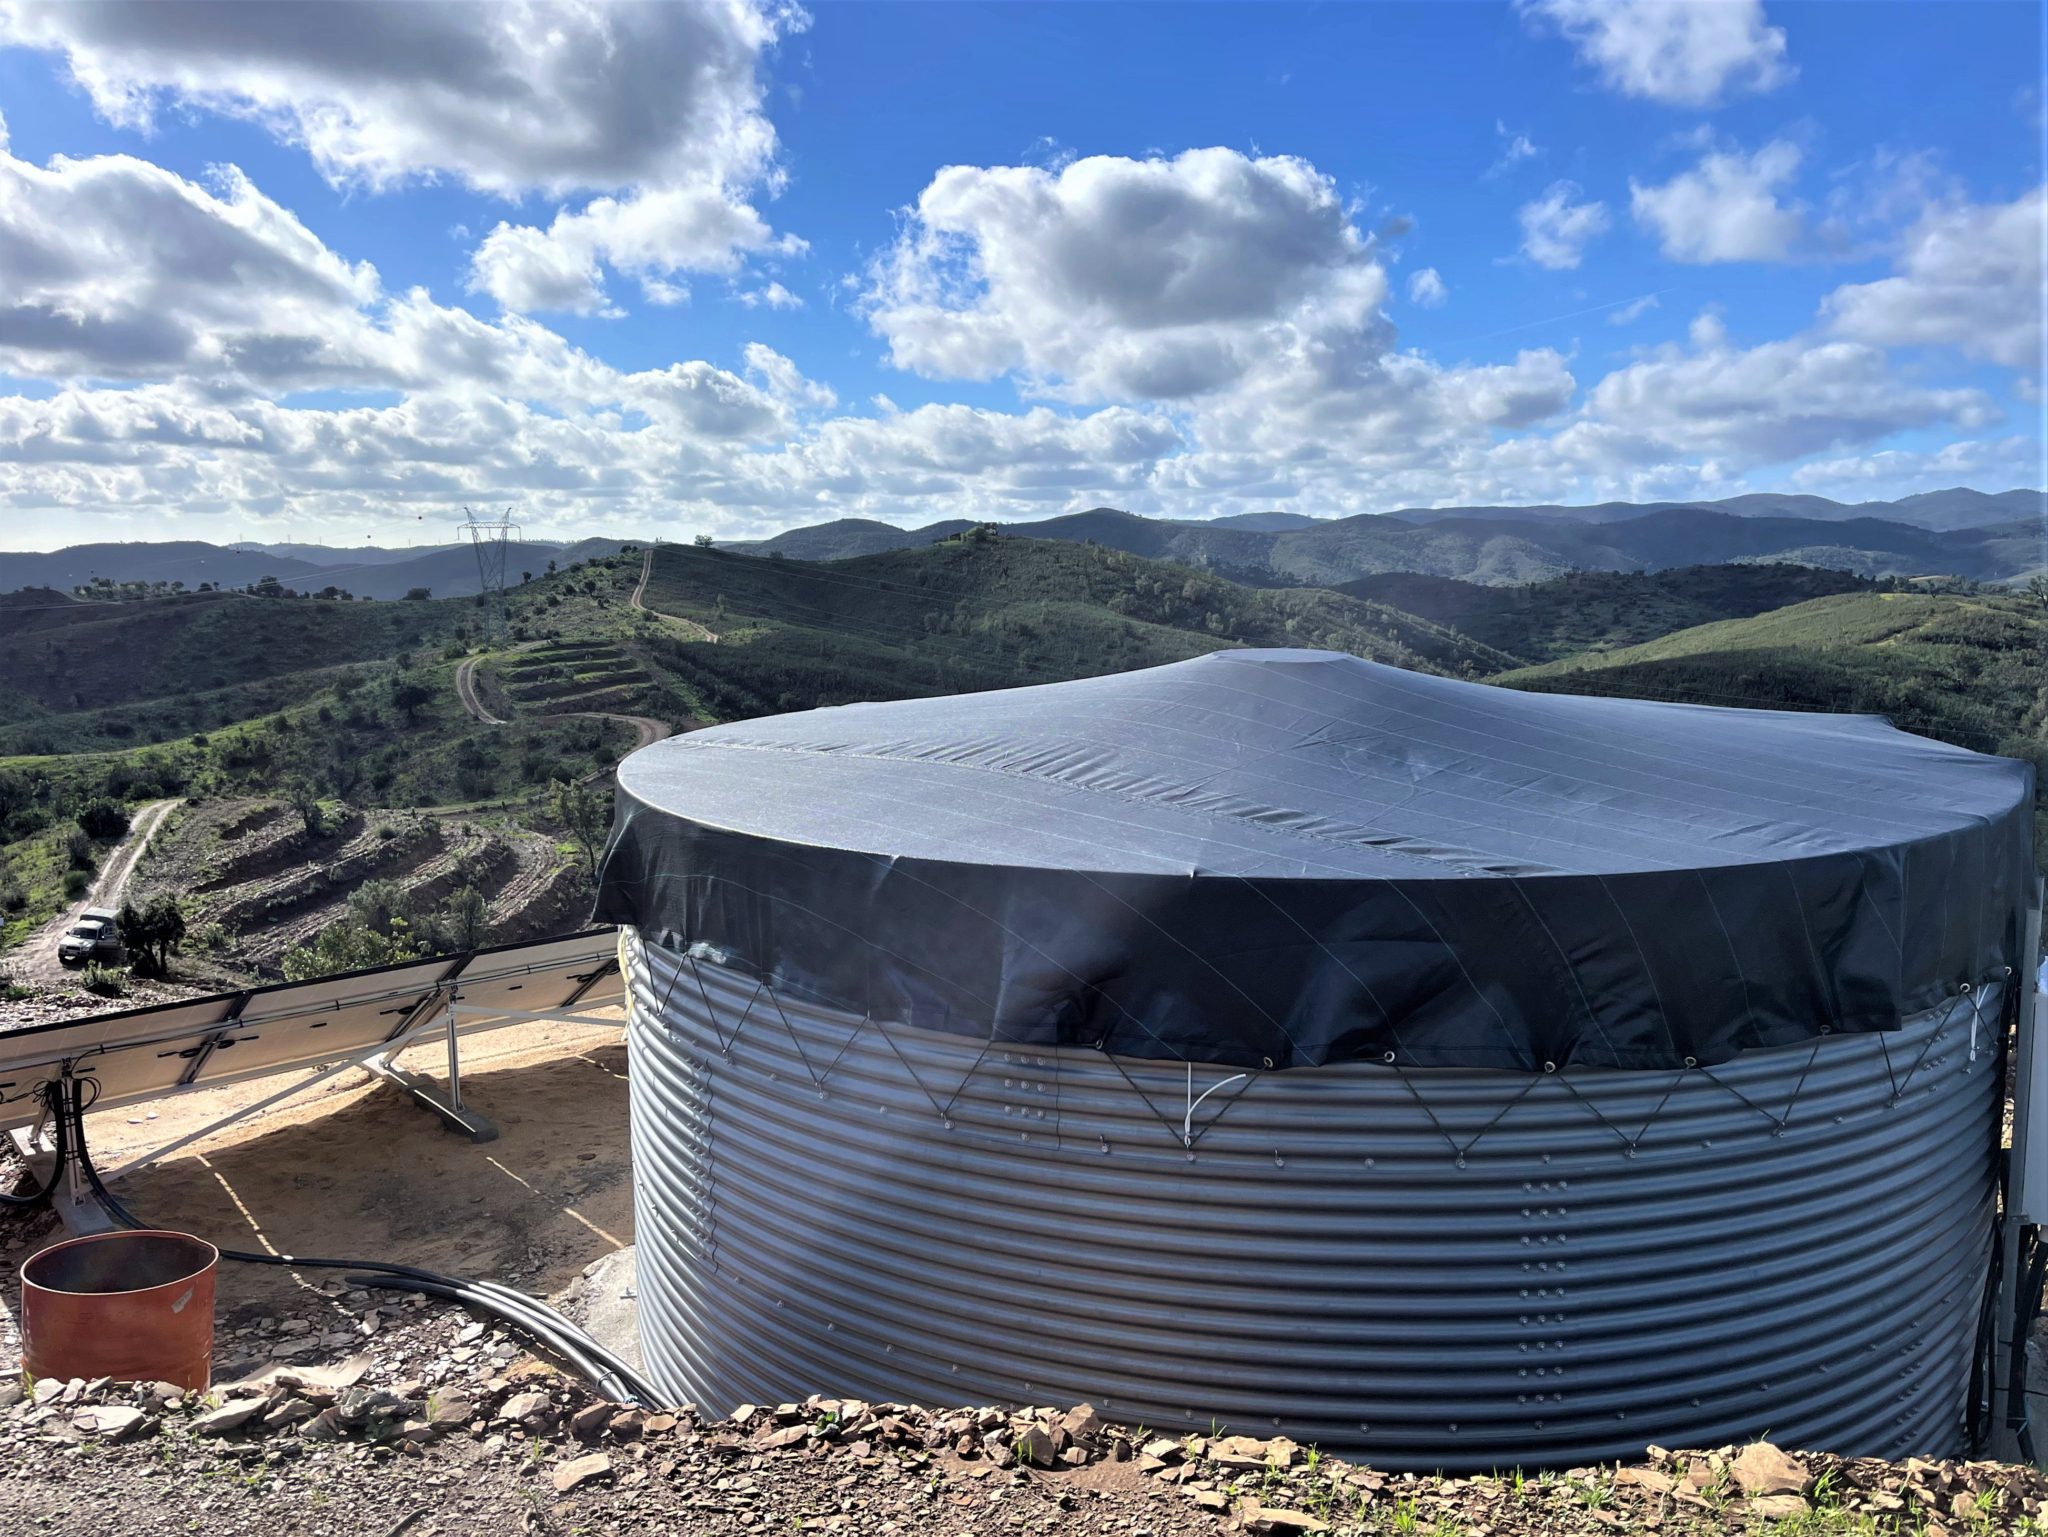 Water tank equipped with the latest novelties, Portugal